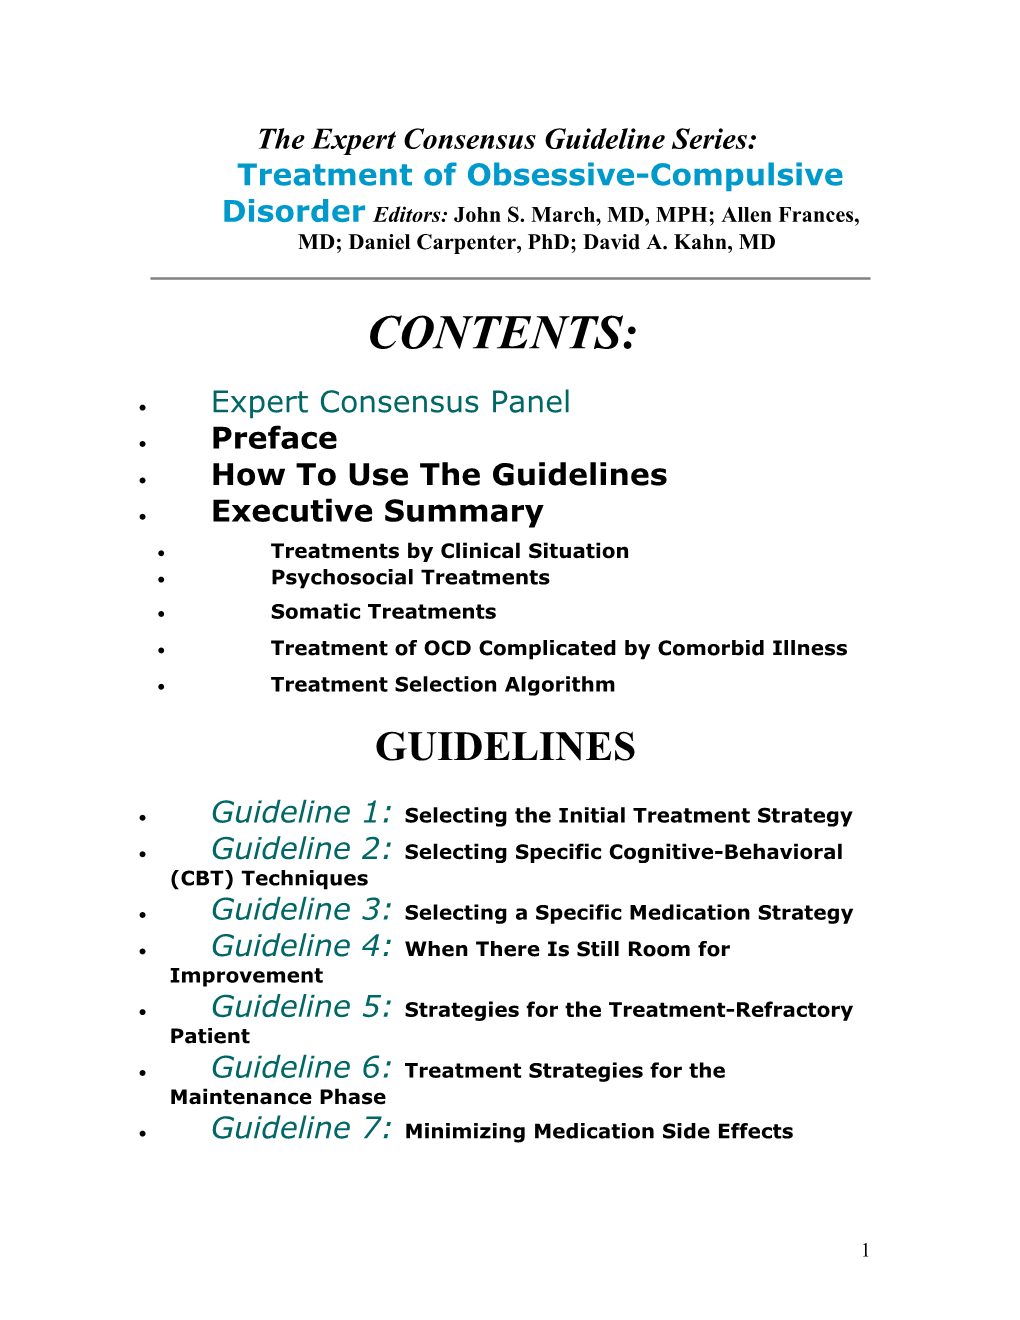 The Expert Consensus Guideline Series